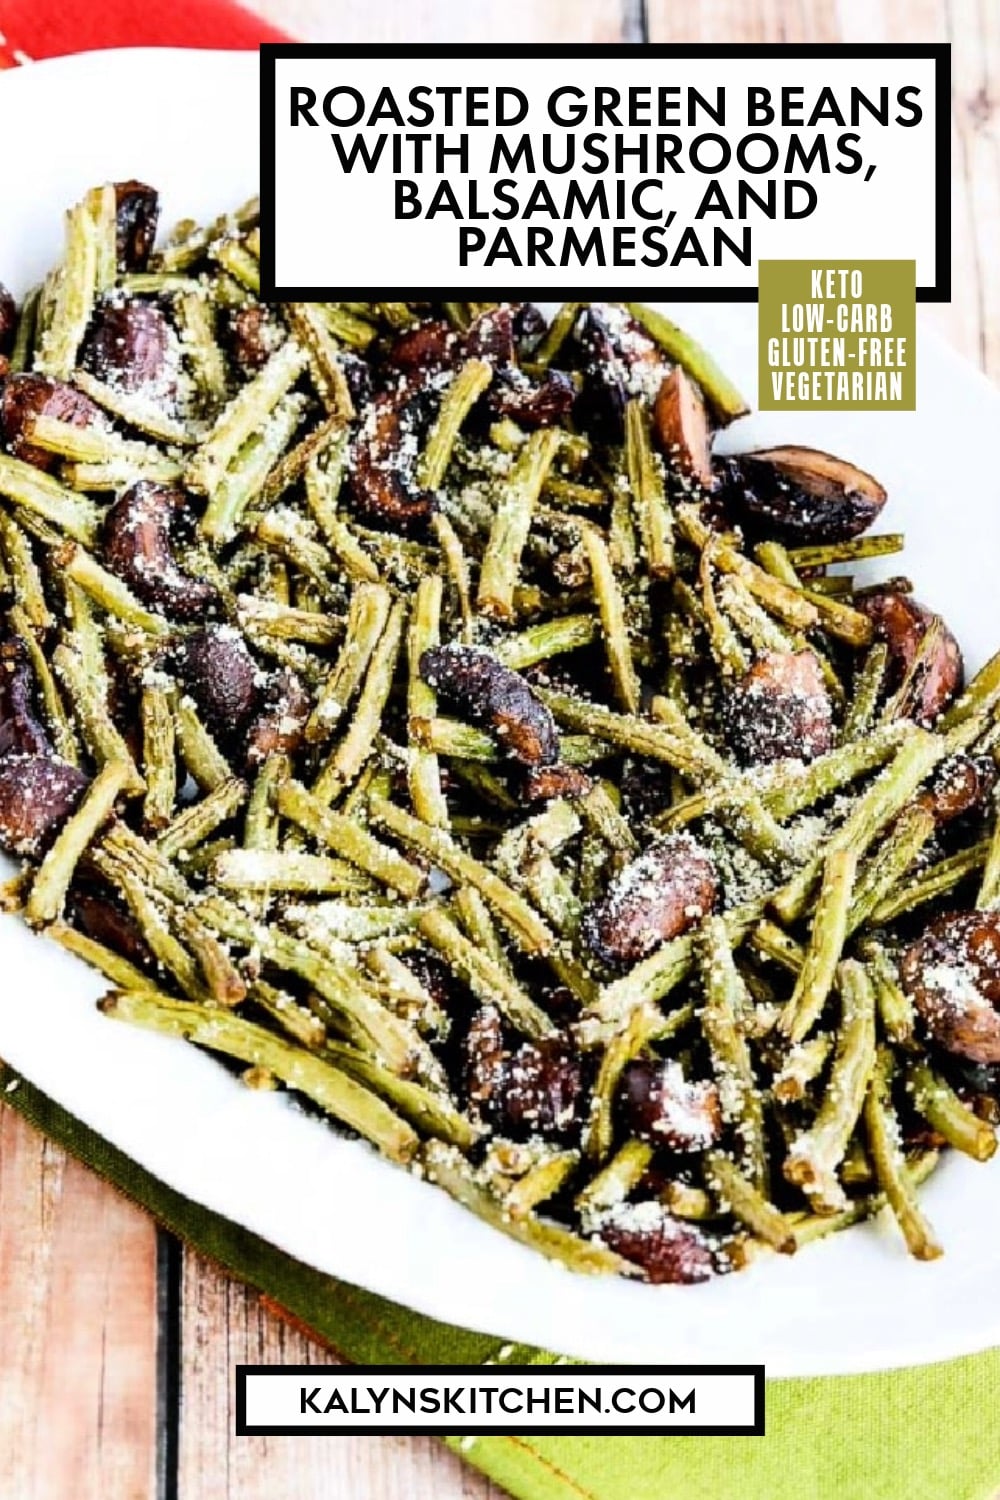 Pinterest image of Roasted Green Beans with Mushrooms, Balsamic, and Parmesan